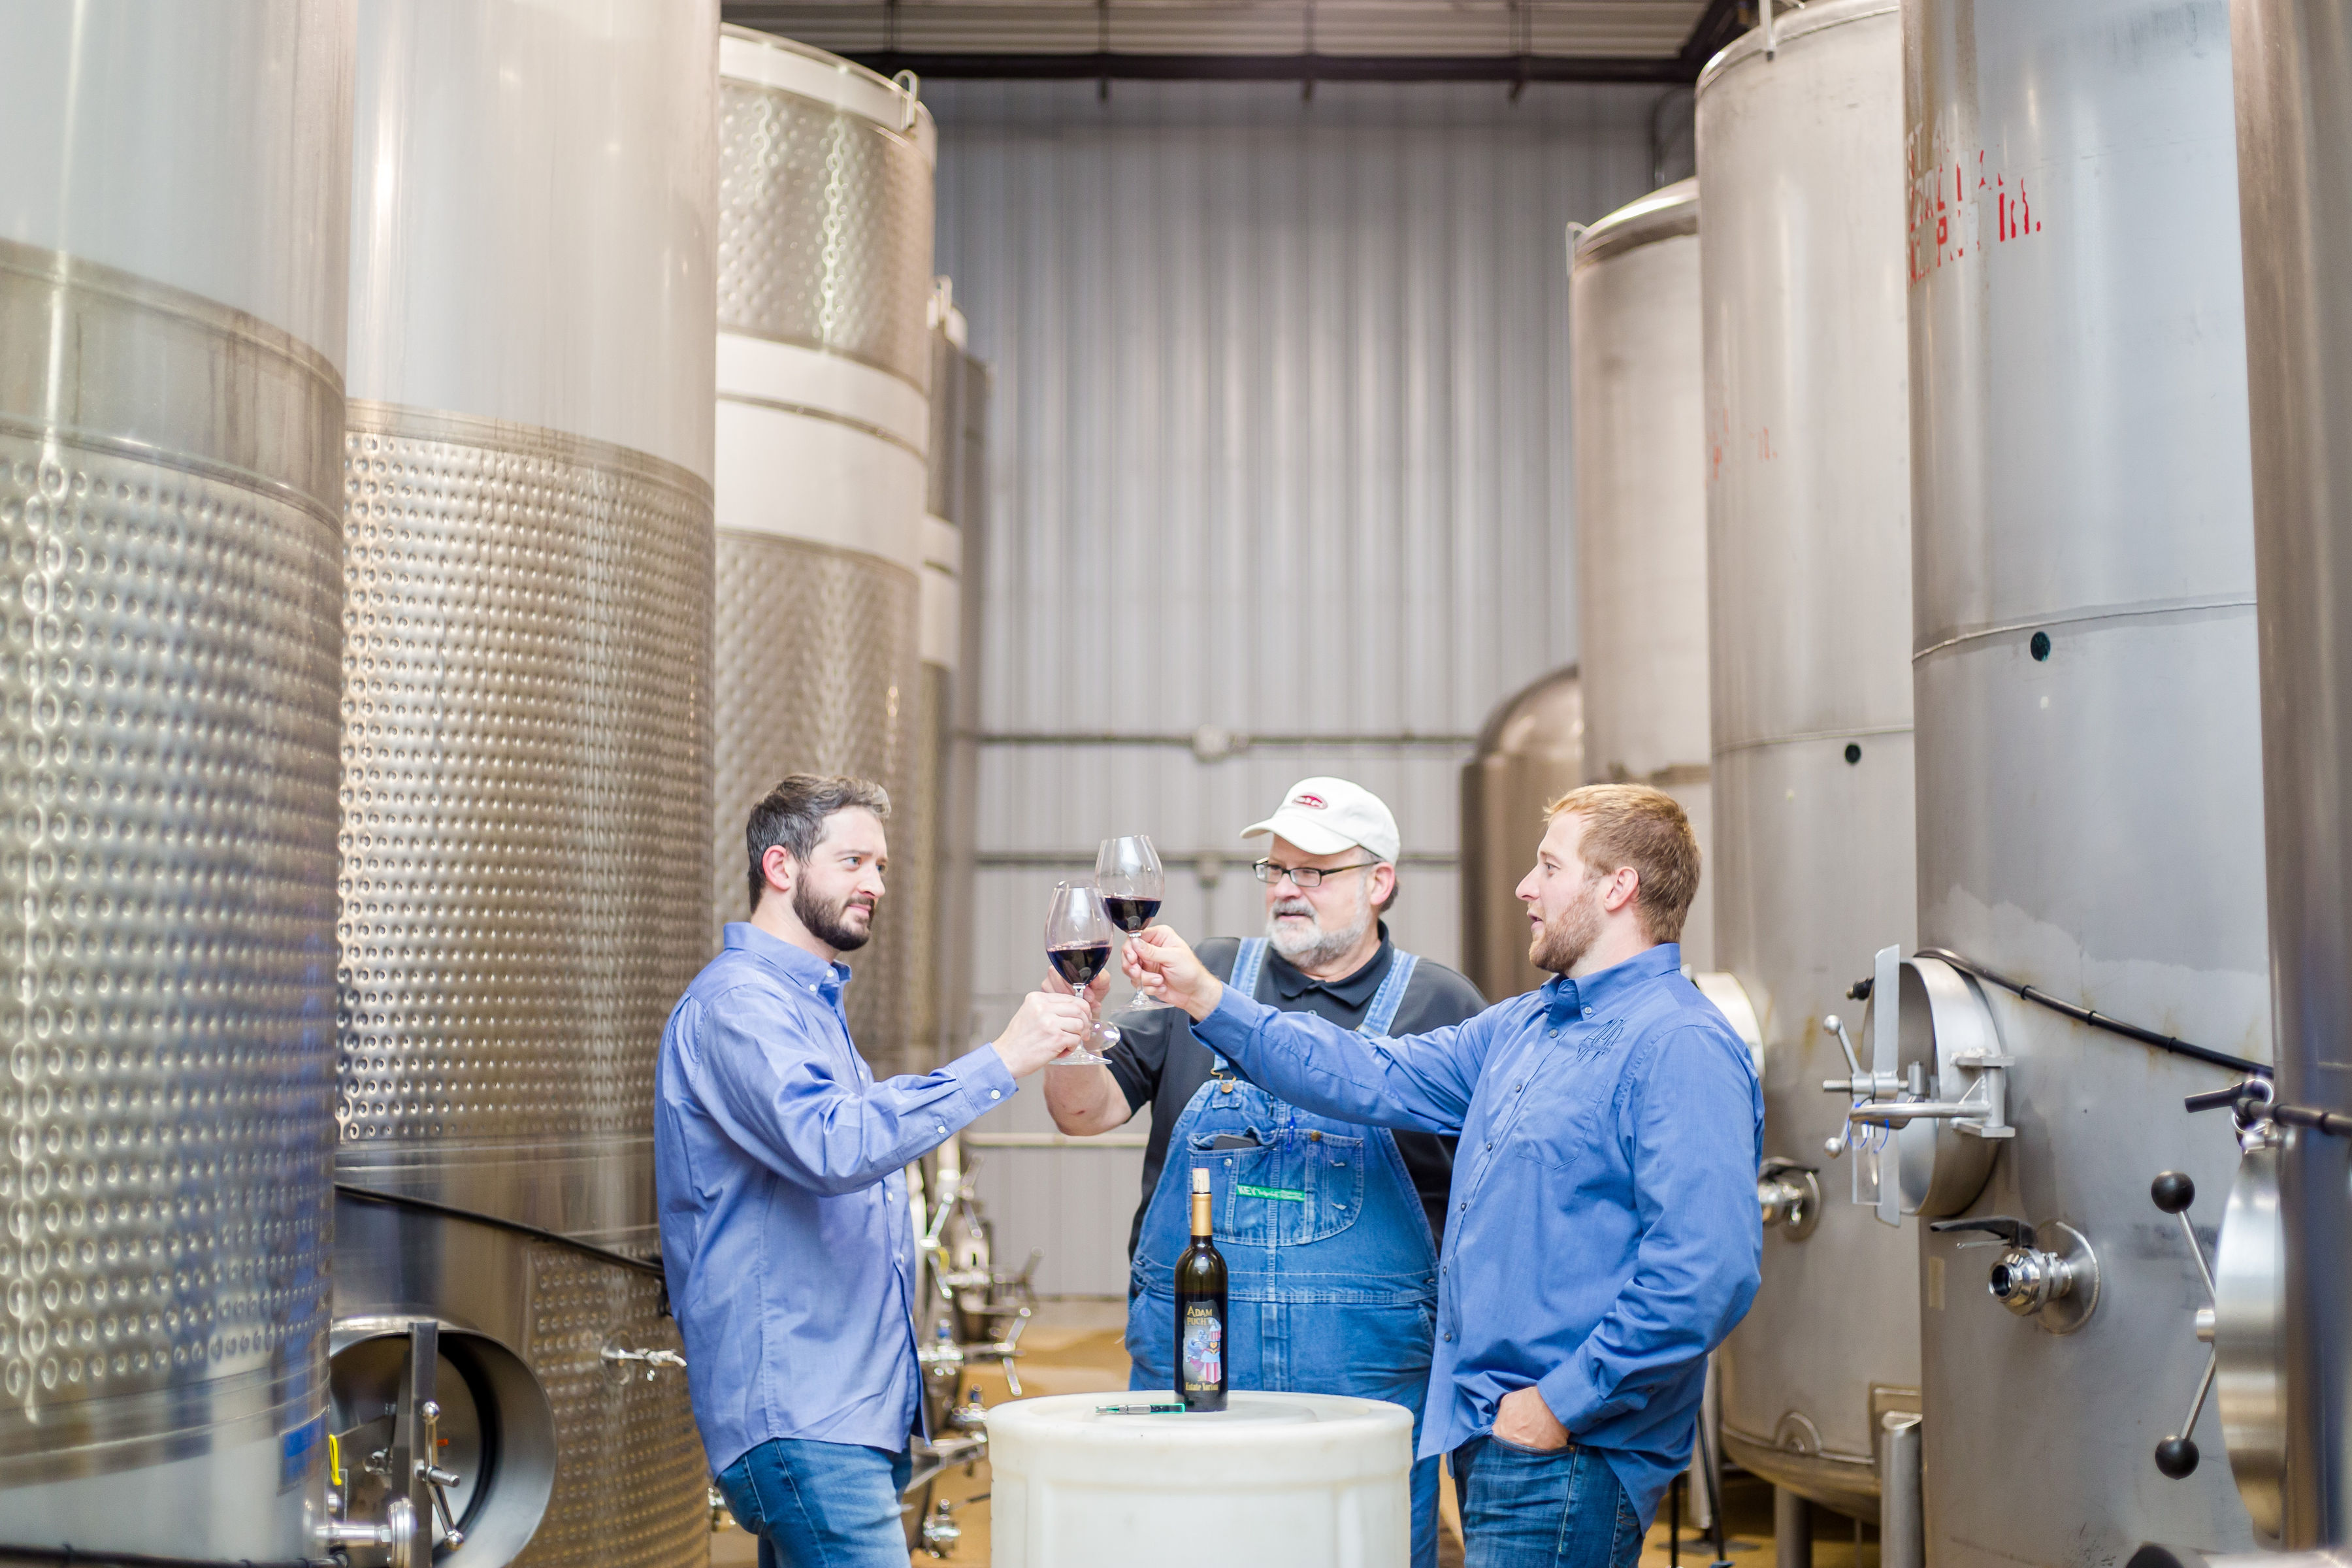 Adam Puchta Winery- Three men in blue toasting glasses of red wine. They are in a room filled with several large metal vats.